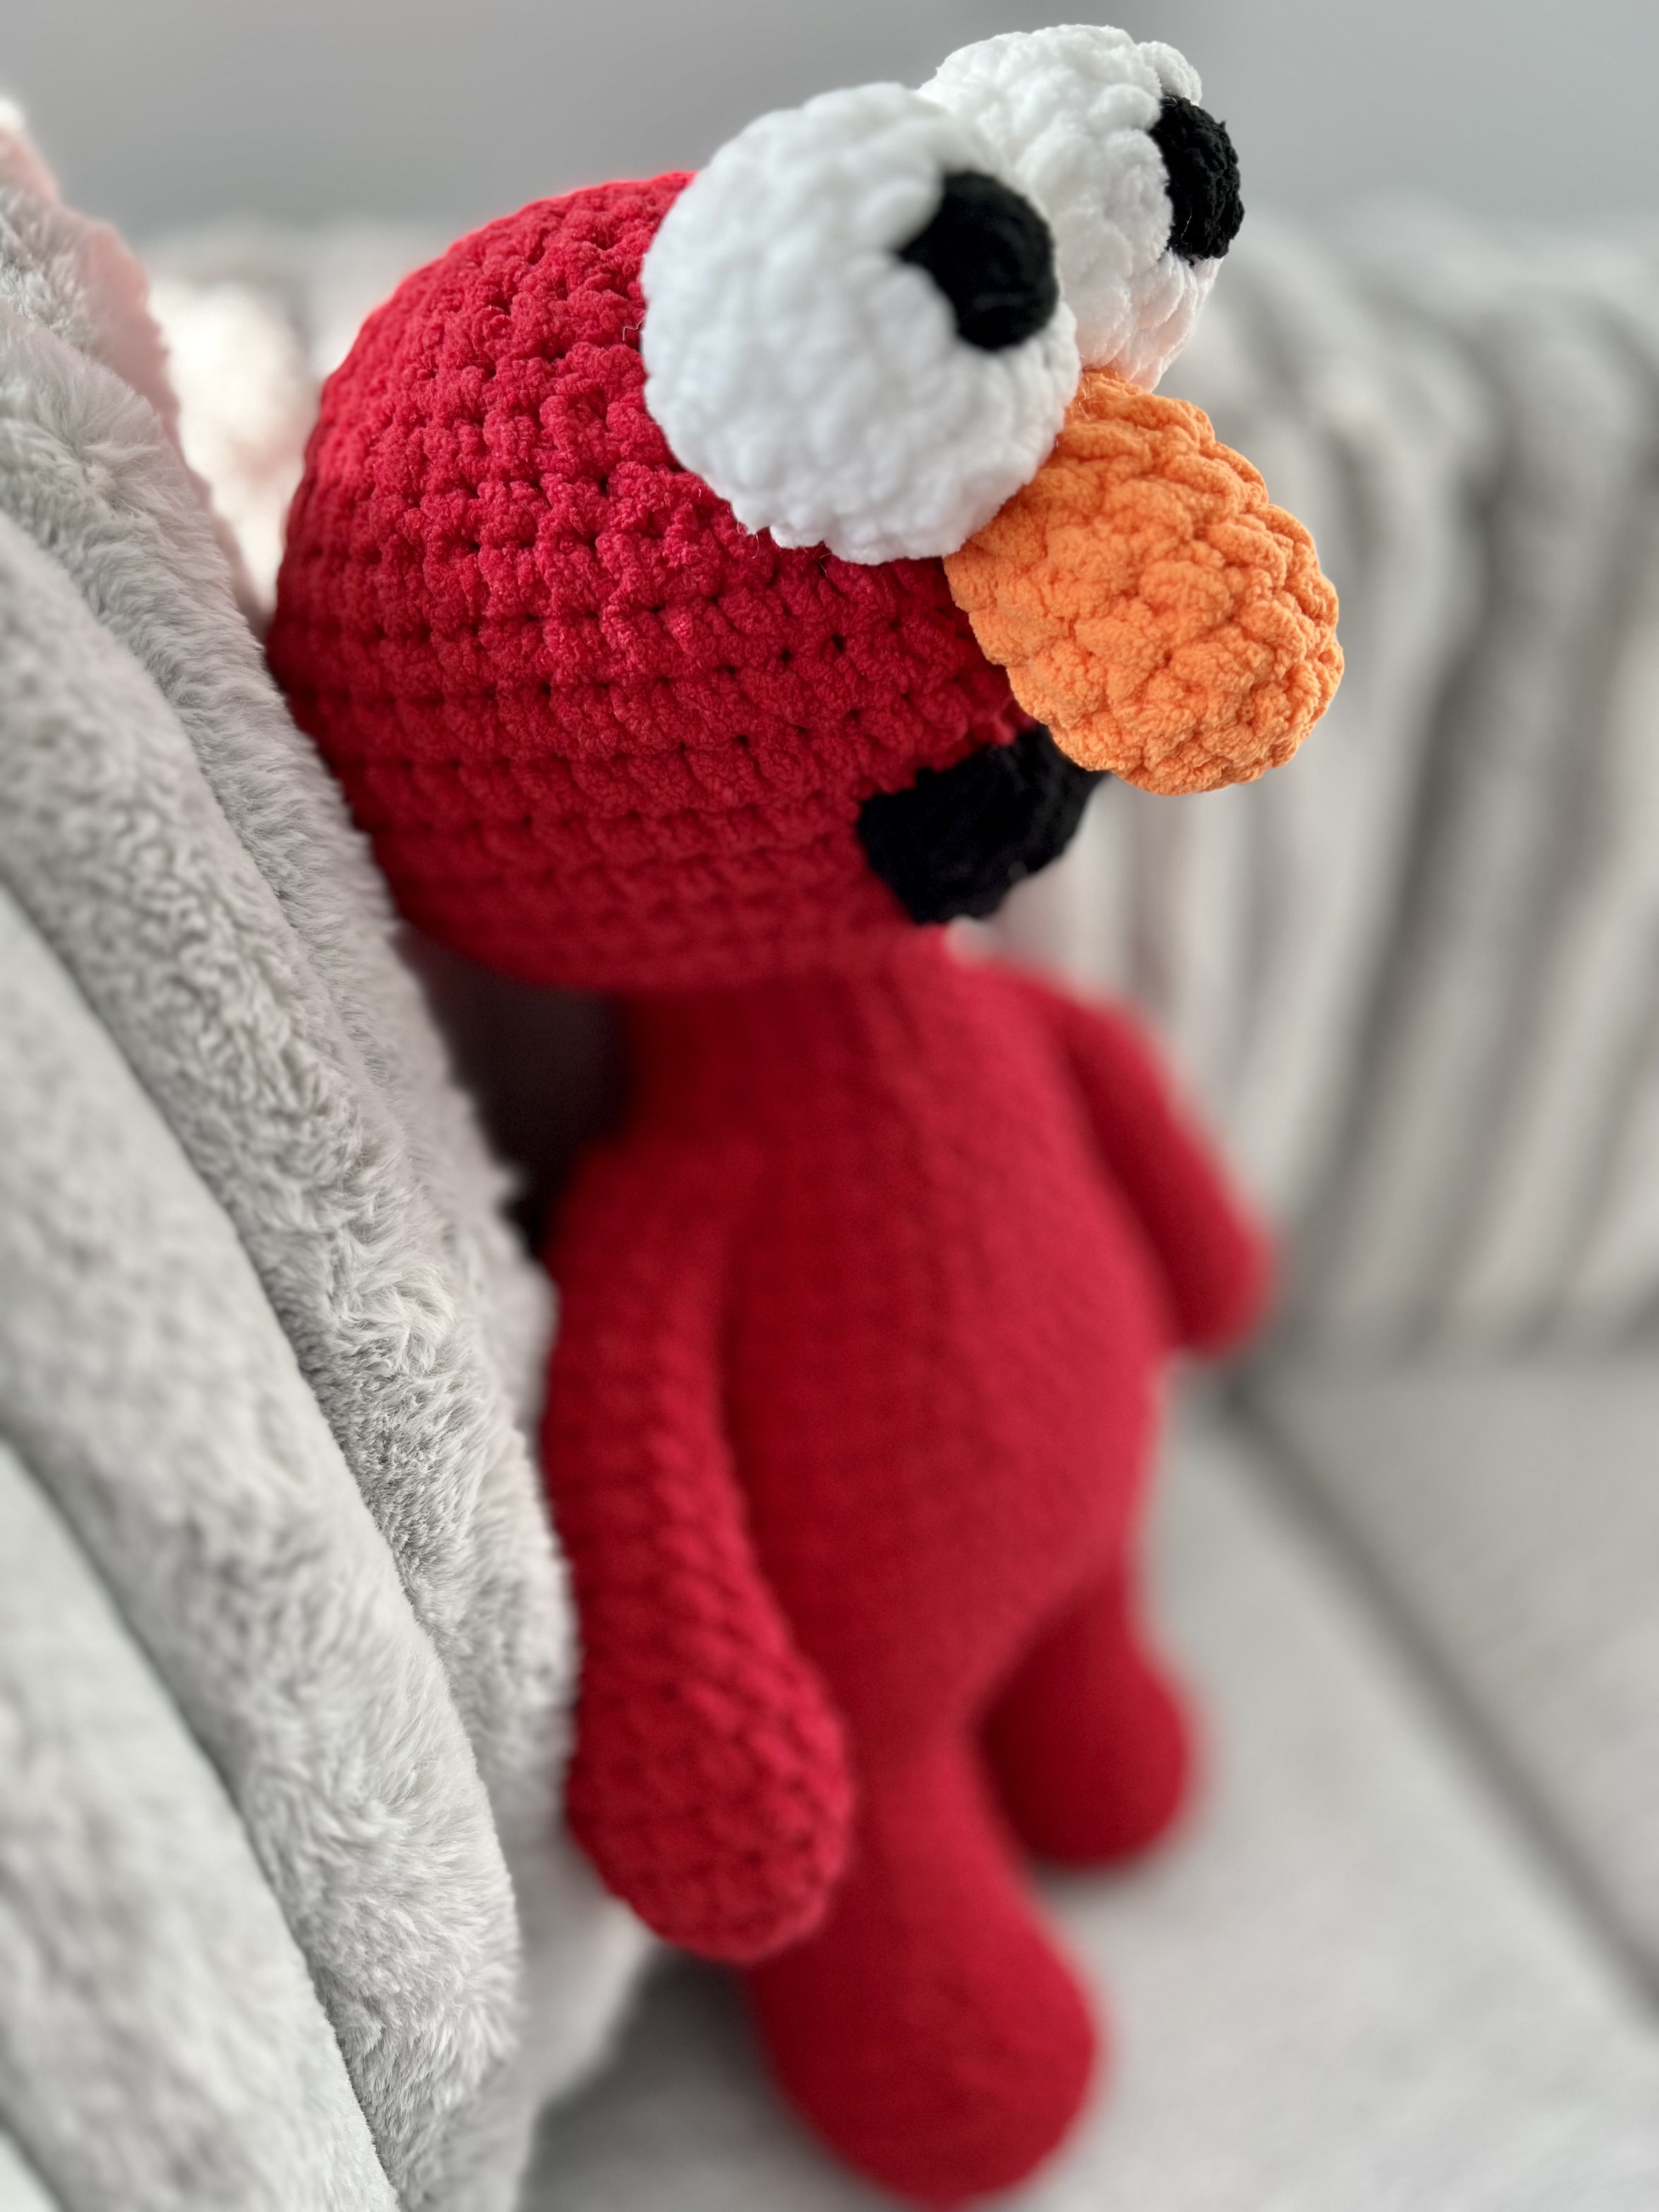 This Elmo Buddy is made with love by Classy Crafty Wife! Shop more unique gift ideas today with Spots Initiatives, the best way to support creators.